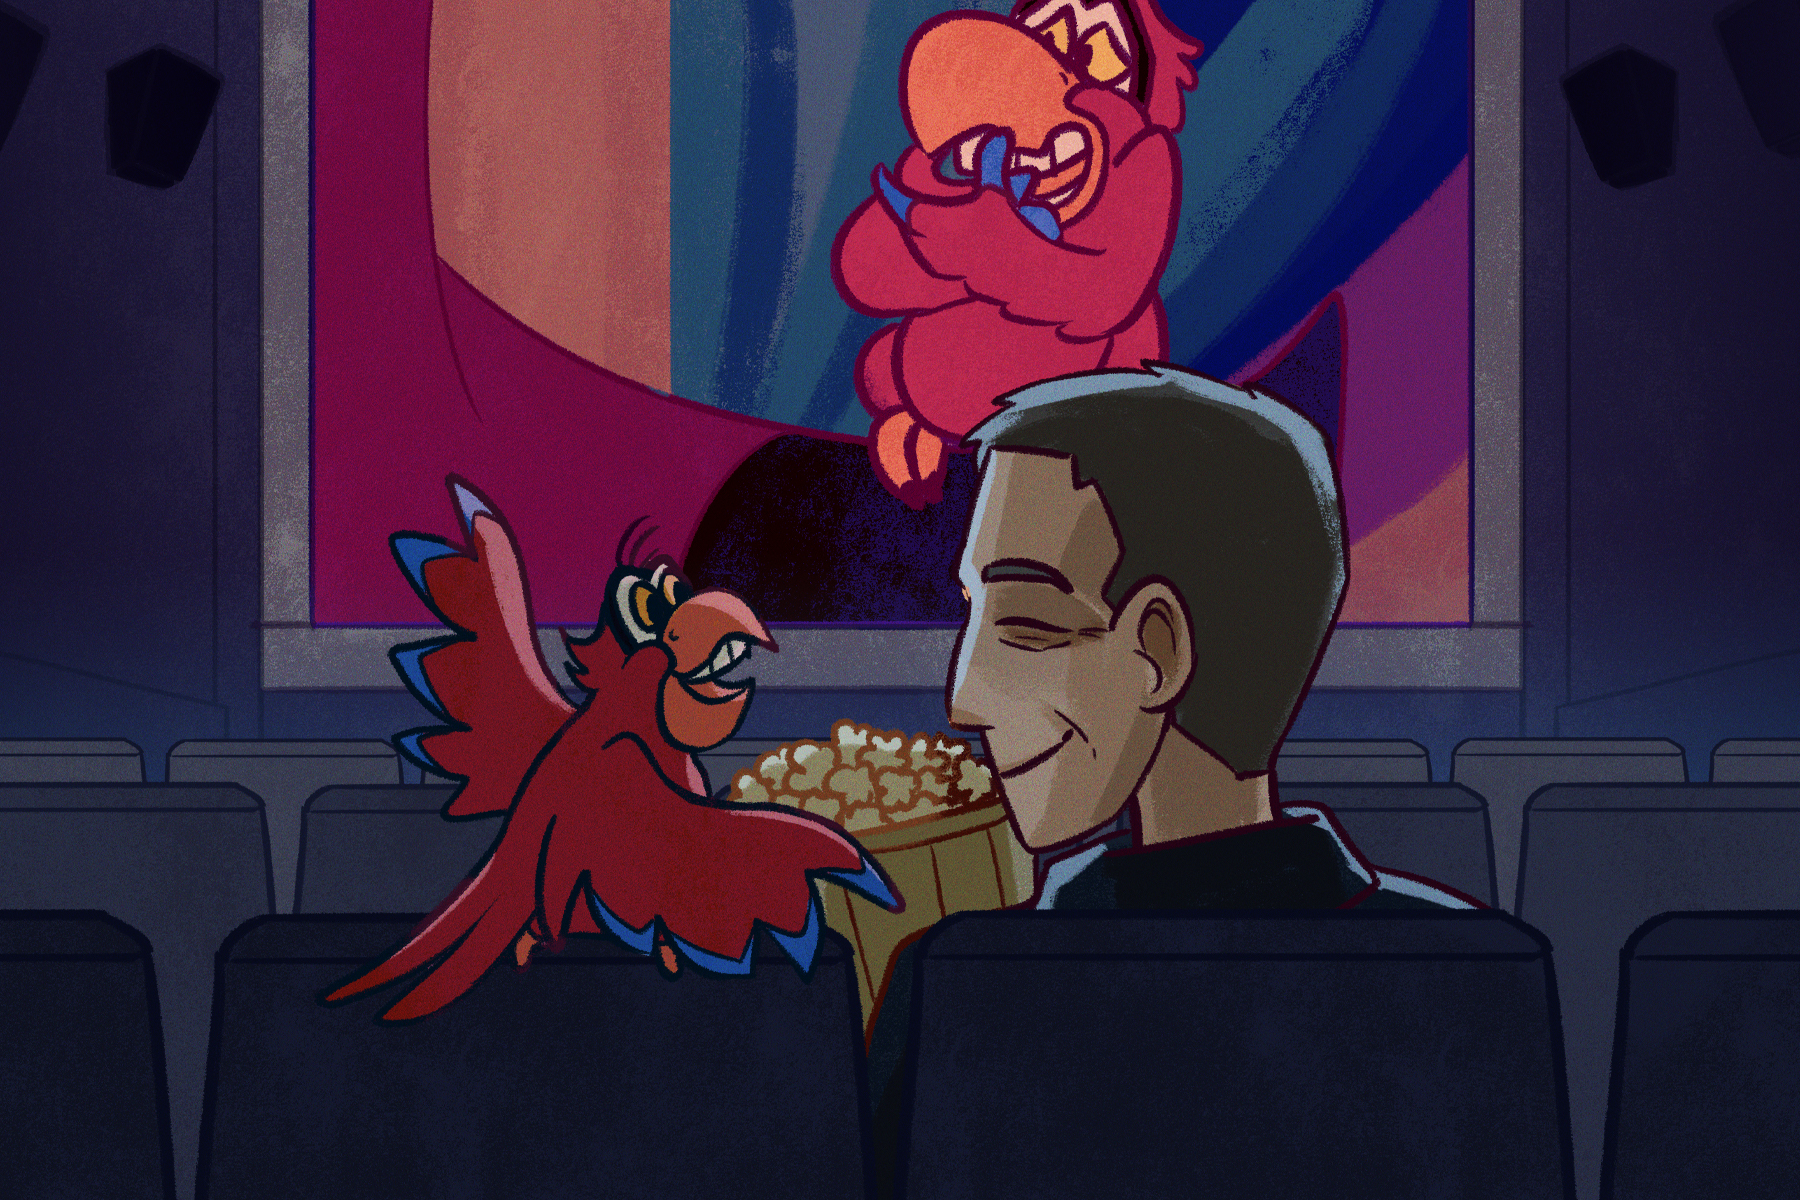 An illustration of Gilbert Gottfried and Iago, the talking parrot from 'Aladdin,' sitting in the movie theater.